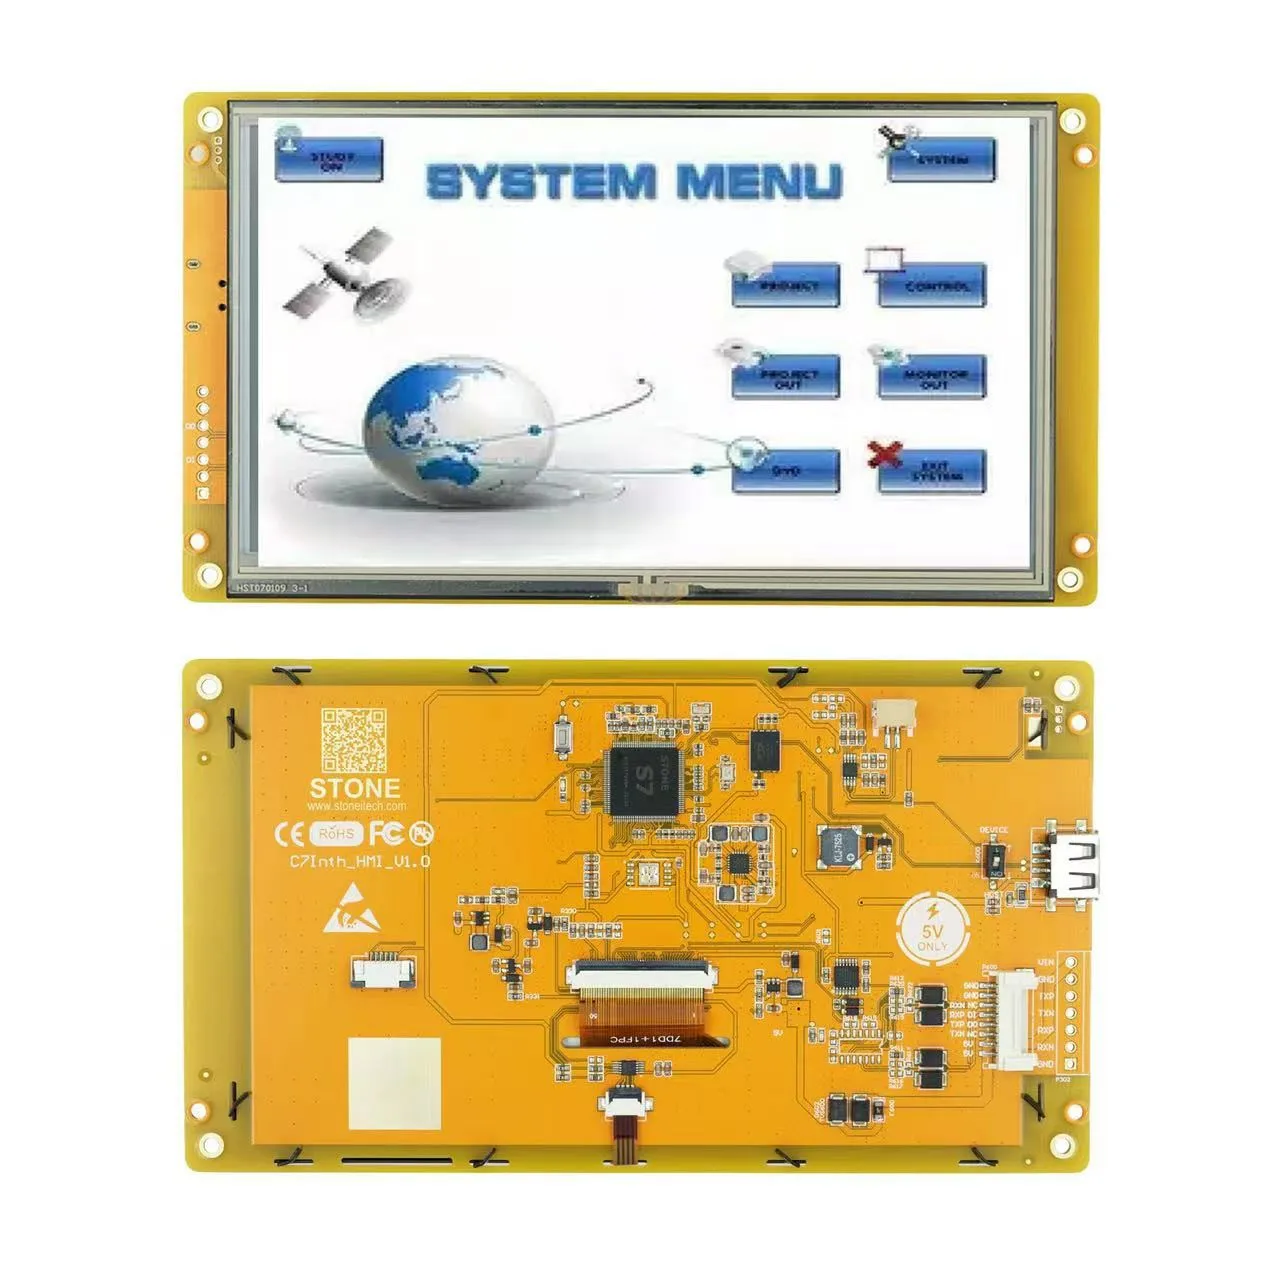 7 Inch HMI LCD Display RS232 TTL USB with Controller Board + GUI Program +Resistive Touchscreen for Industry